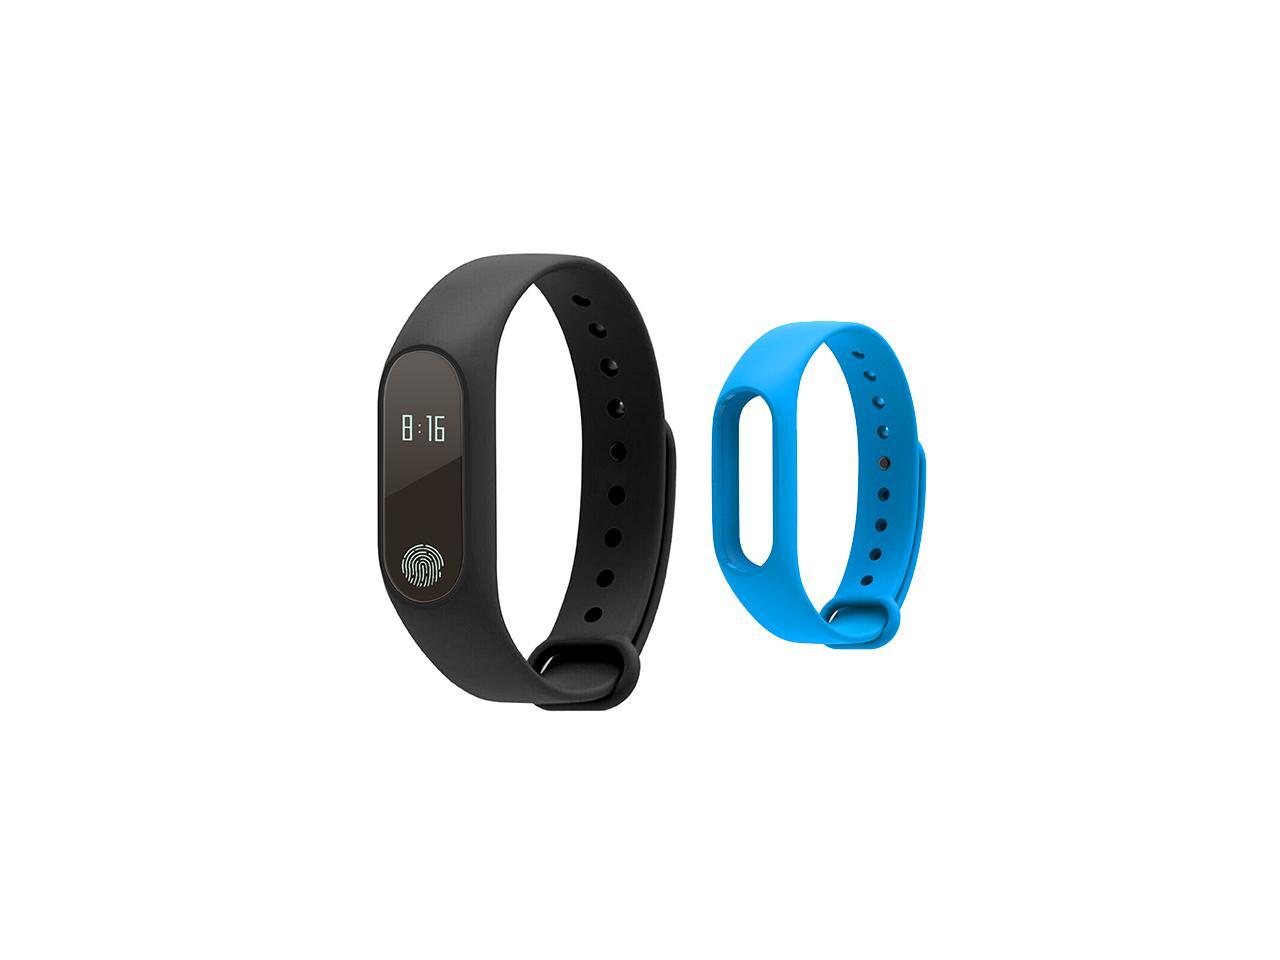 GuiWoo M2 Heart Rate Smart Wristbands Band IP67 Waterproof Smart Bracelet Call Remind Bluetooth 4.0 Smartband with Sleep Monitor For iOS Android (Black) + Blue Rubber Strap